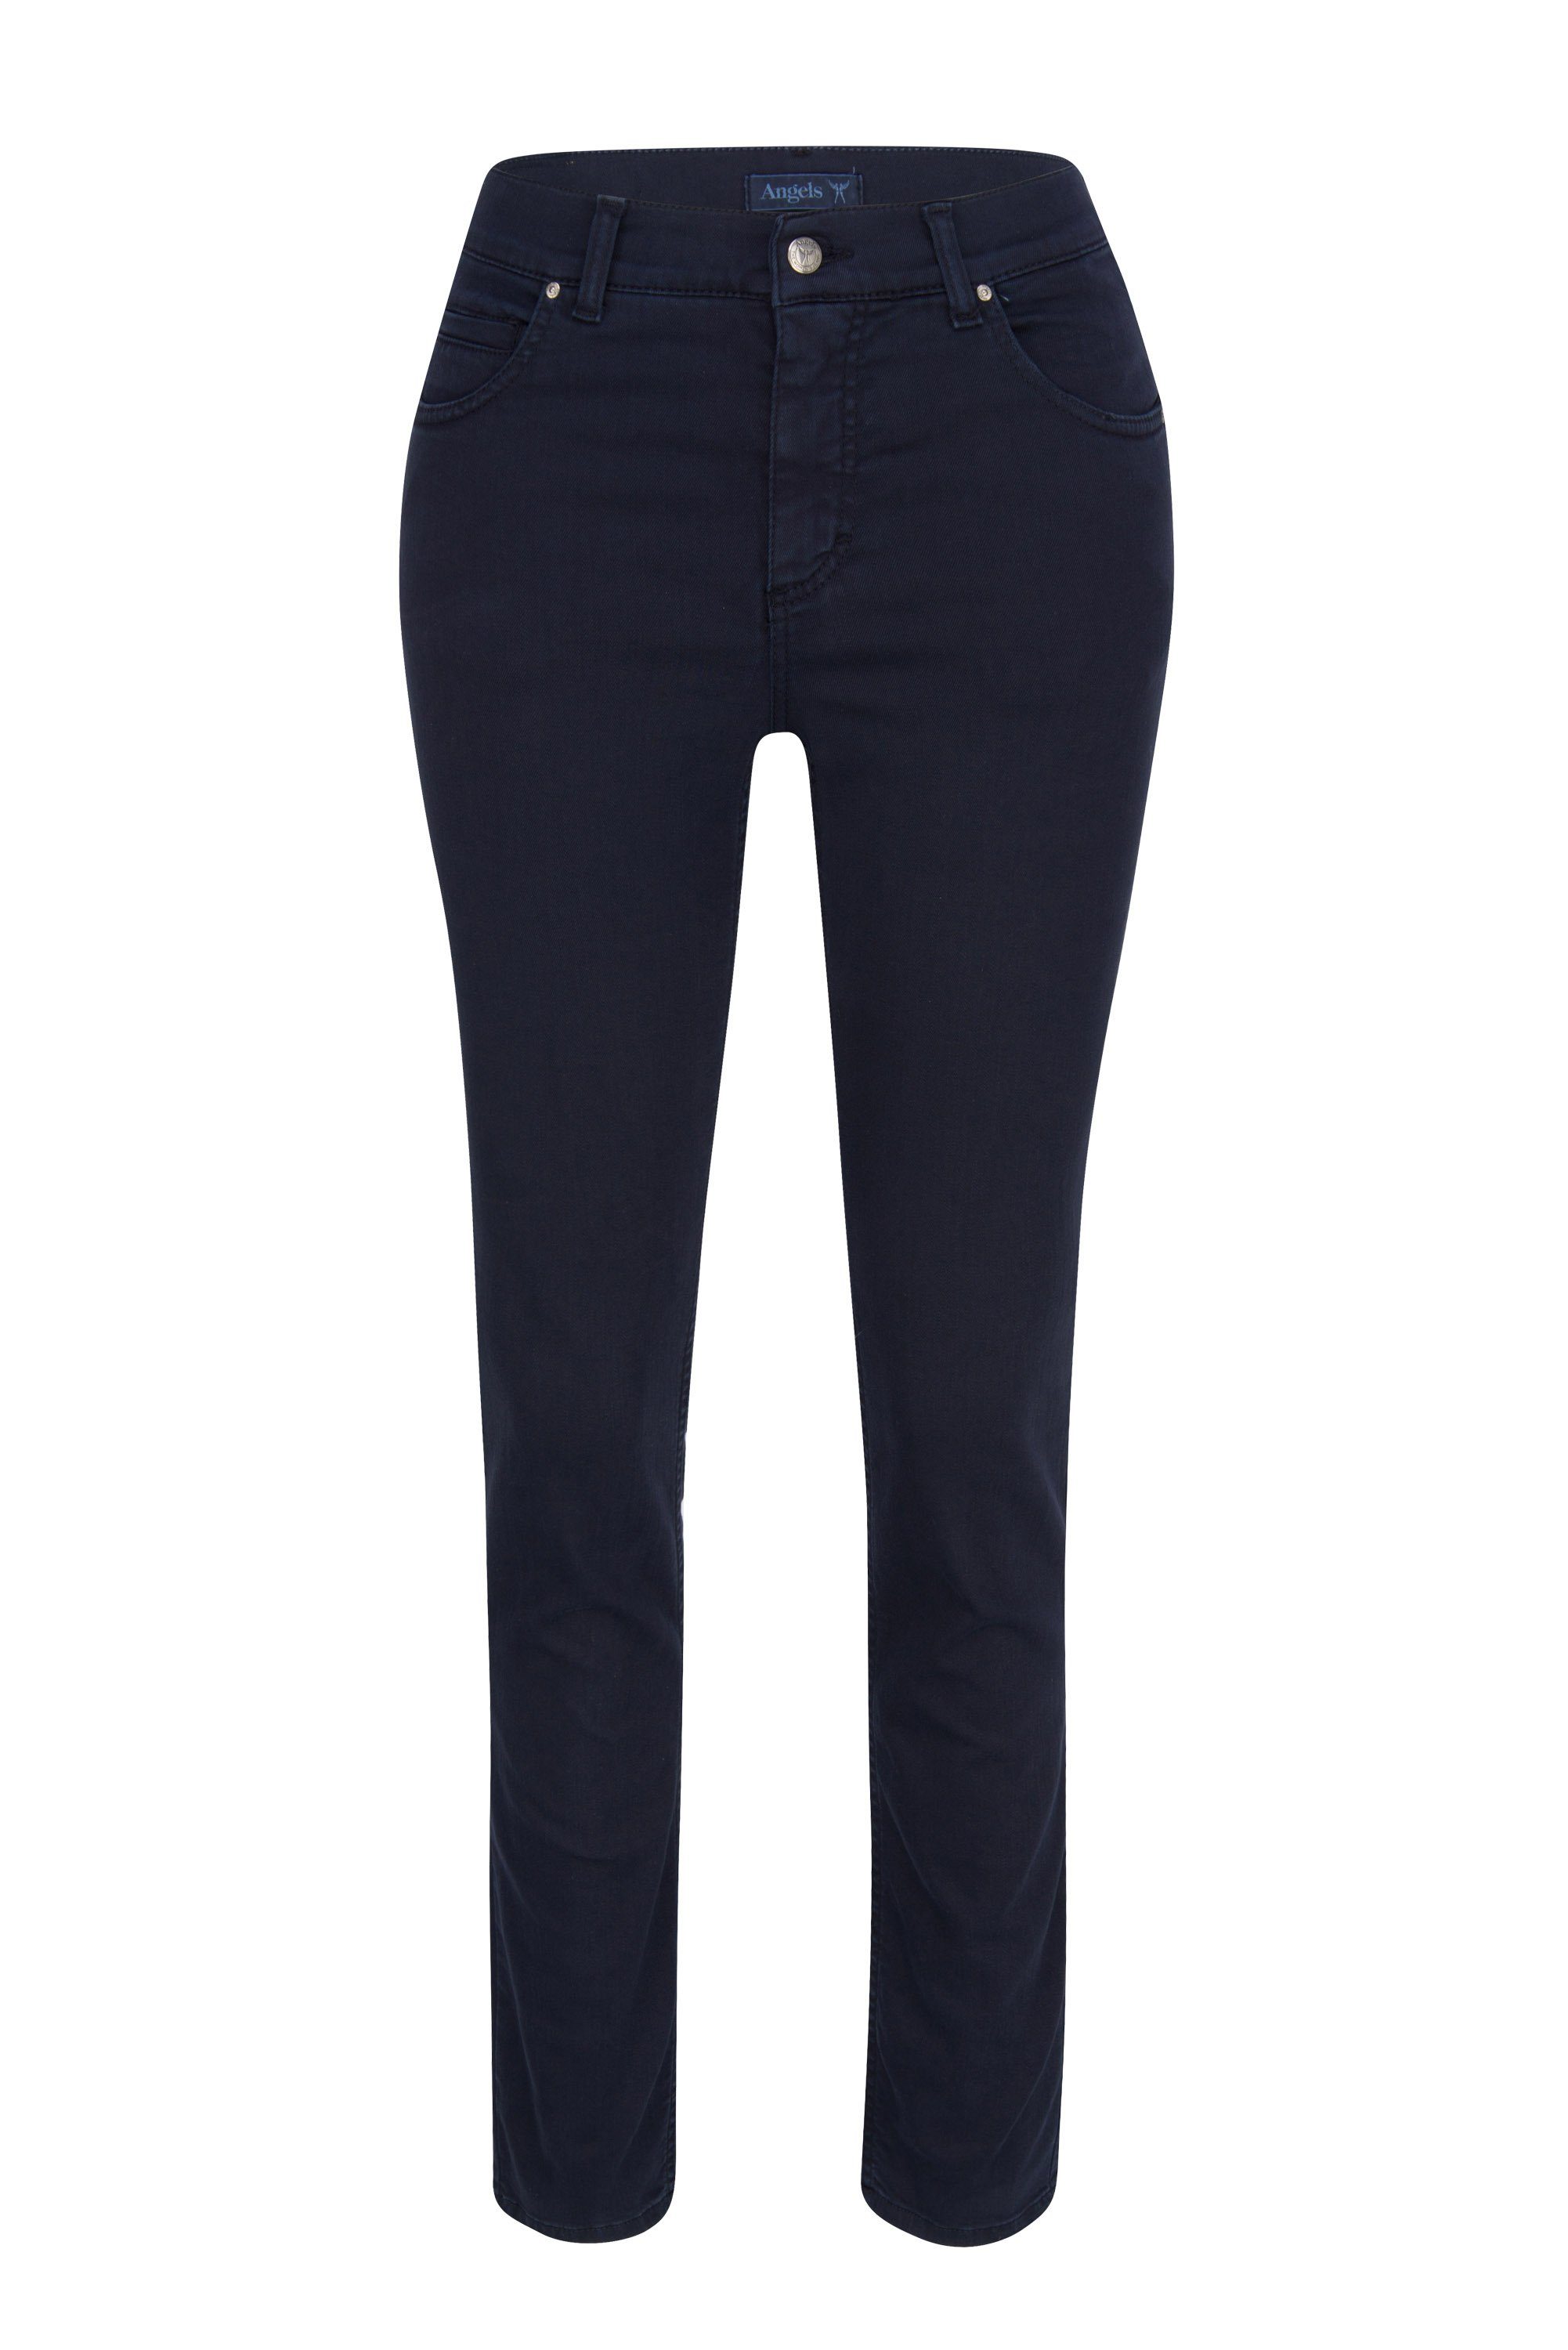 ANGELS Stretch-Jeans ANGELS JEANS CICI midnight blue 190 3400.220